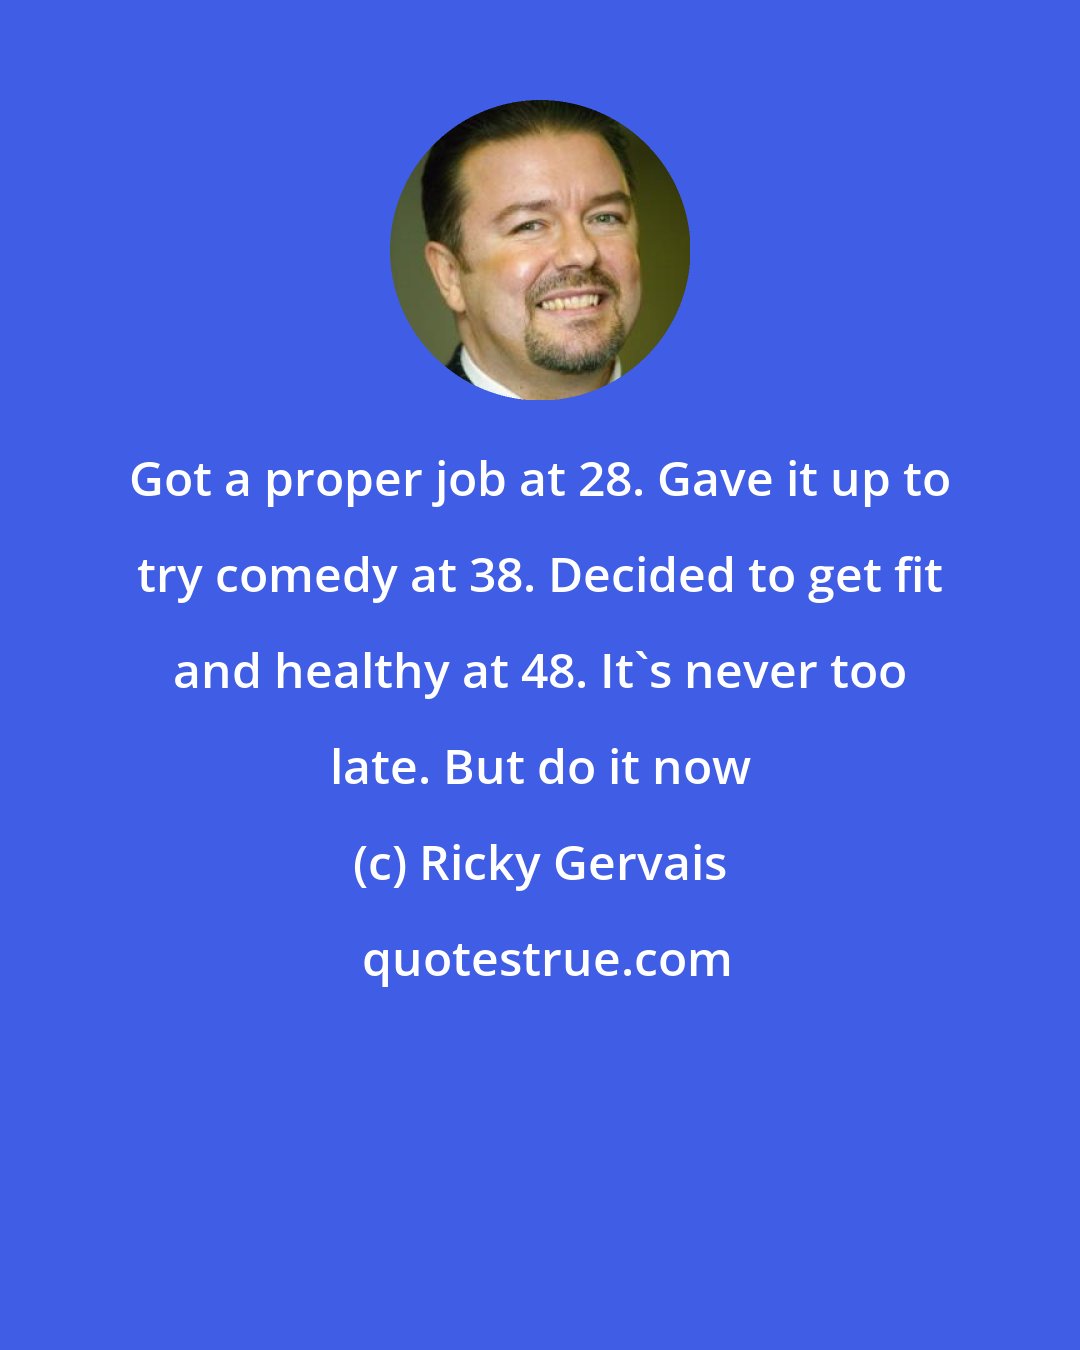 Ricky Gervais: Got a proper job at 28. Gave it up to try comedy at 38. Decided to get fit and healthy at 48. It's never too late. But do it now